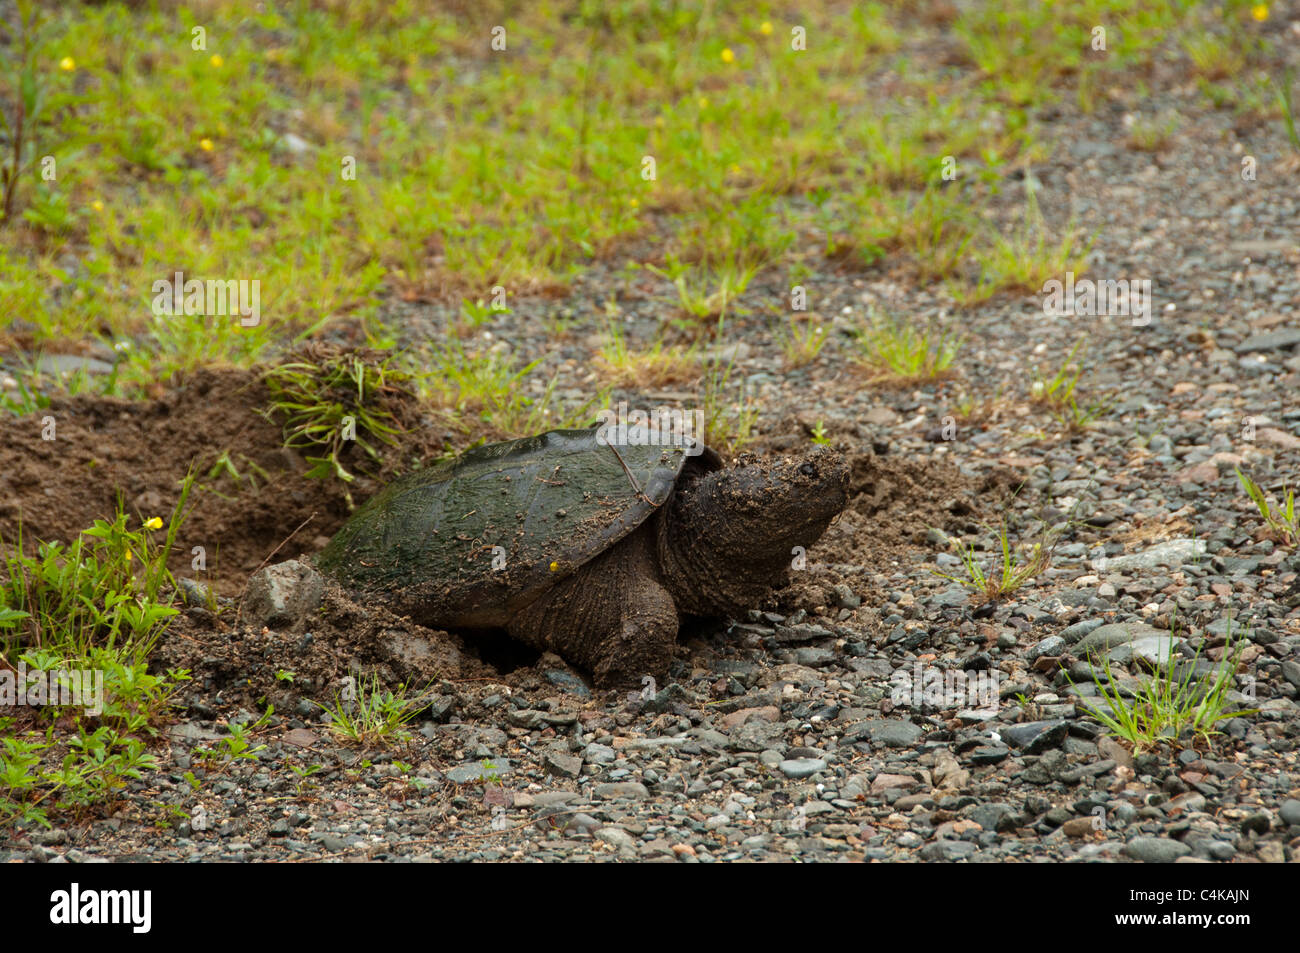 Common Snapping Turtle laying eggs Stock Photo